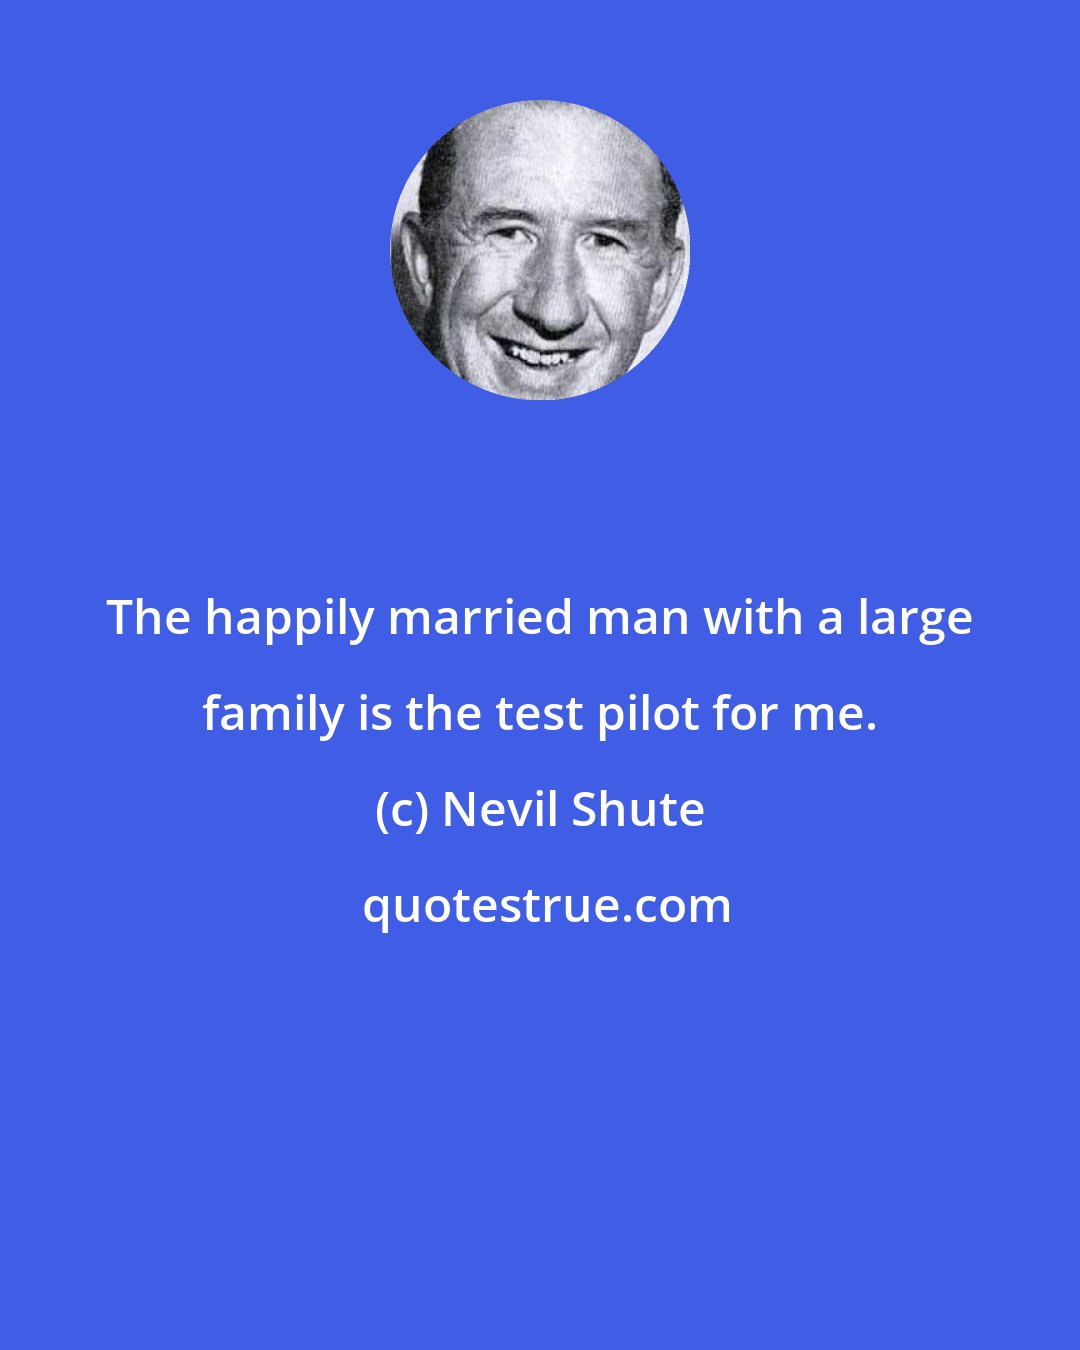 Nevil Shute: The happily married man with a large family is the test pilot for me.